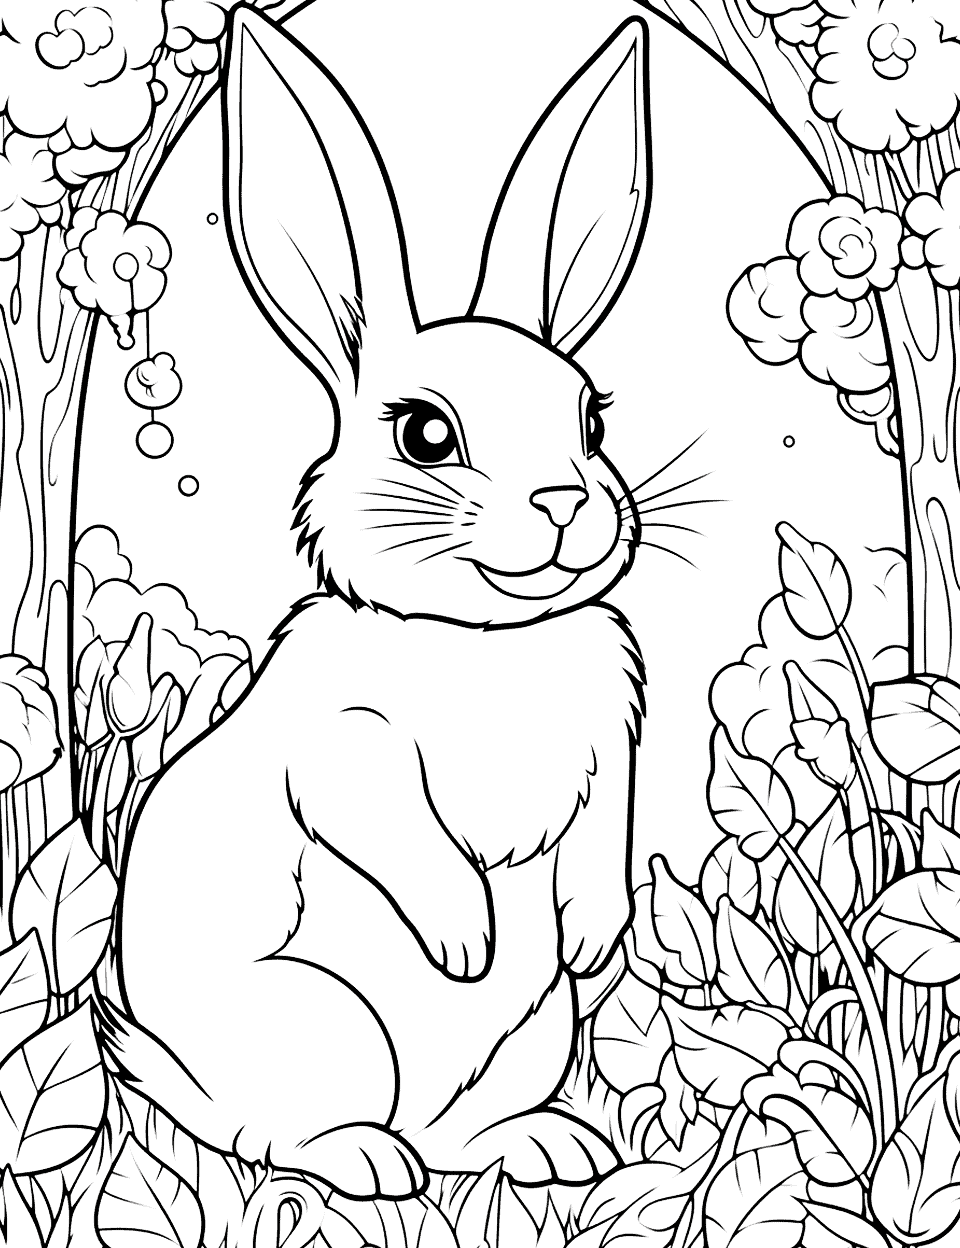 Detailed Bunny in the Forest Coloring Page - A bunny with intricate patterns and details, surrounded by forest elements.